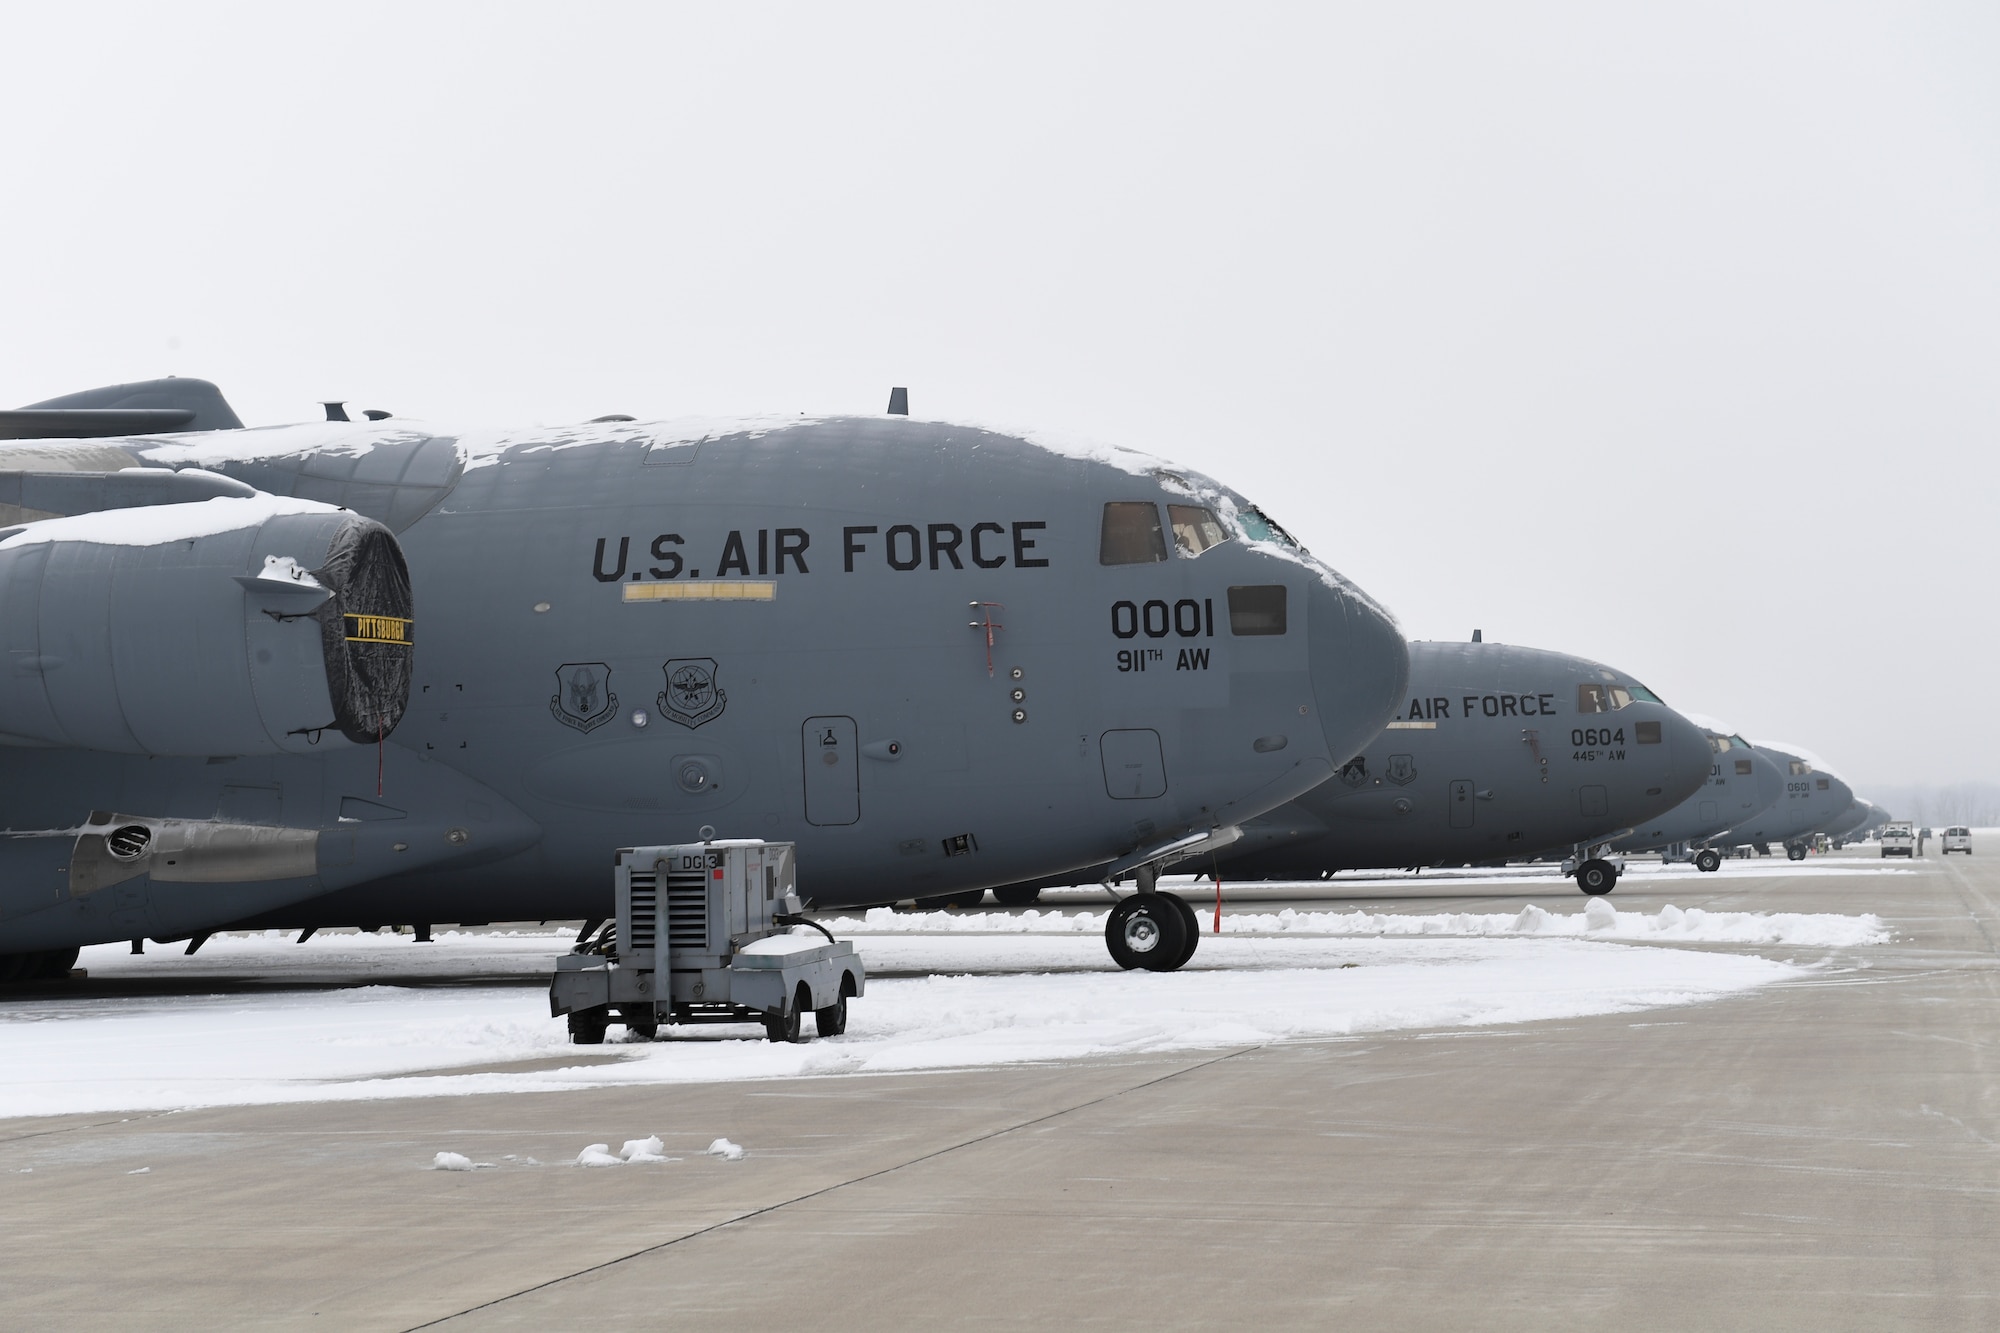 C-17 Globemaster III aircraft assigned to the 911th Airlift Wing and the 445th Airlift Wing sit on the flightline at Wright-Patterson Air Force Base, Ohio, January 15, 2019. The aircraft assigned to the 911th AW are temporarily at Wright-Patterson AFB due to the 911th AW’s base conversion from the C-130 aircraft to the C-17 aircraft, including the addition of a new hangar and changes to the flightline. (U.S. Air Force photo by Joshua J. Seybert)